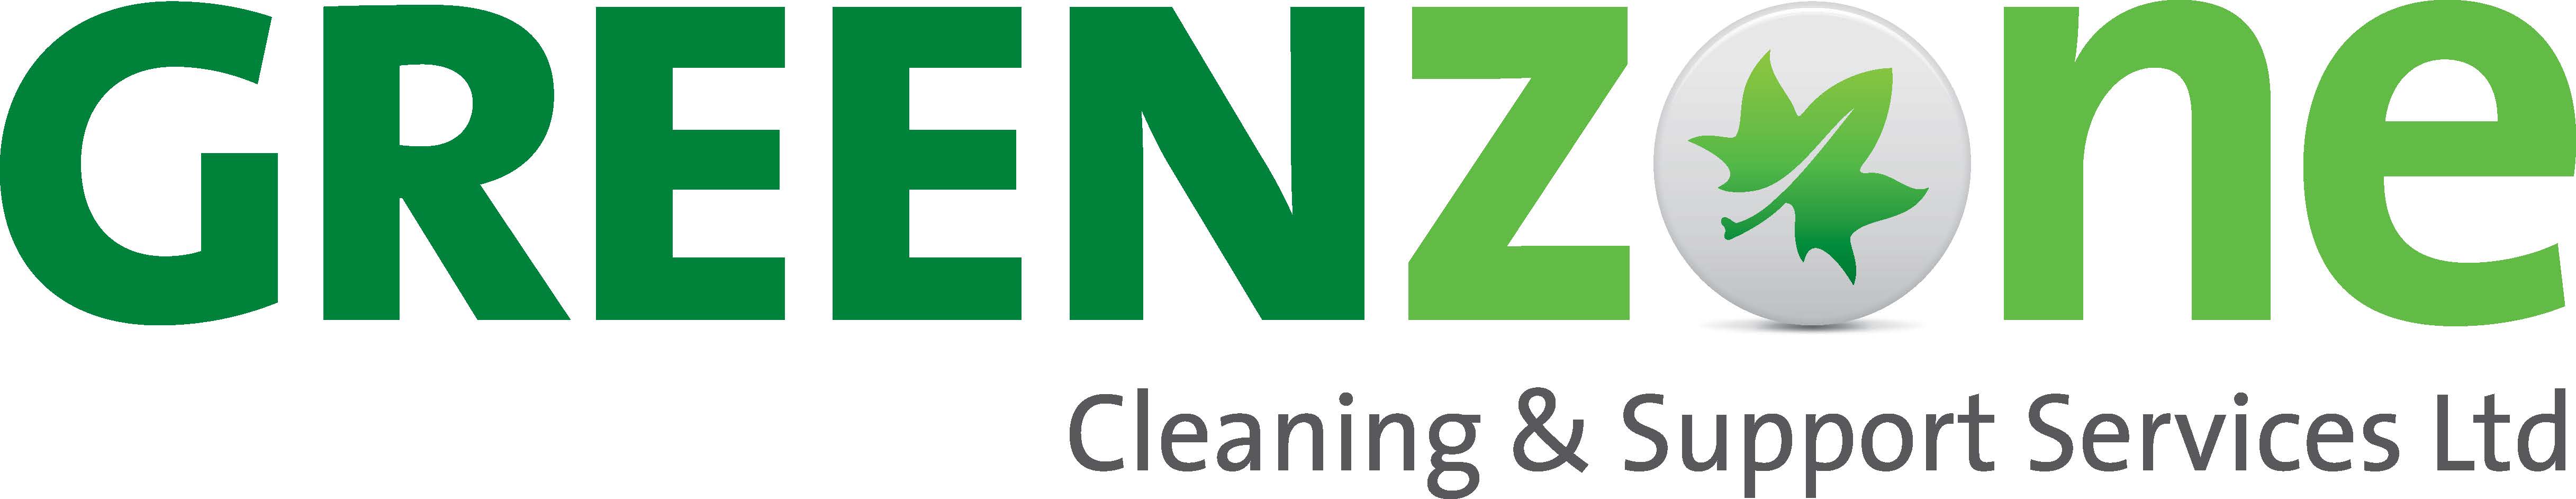 logo for GreenZone Cleaning & Support Services Ltd